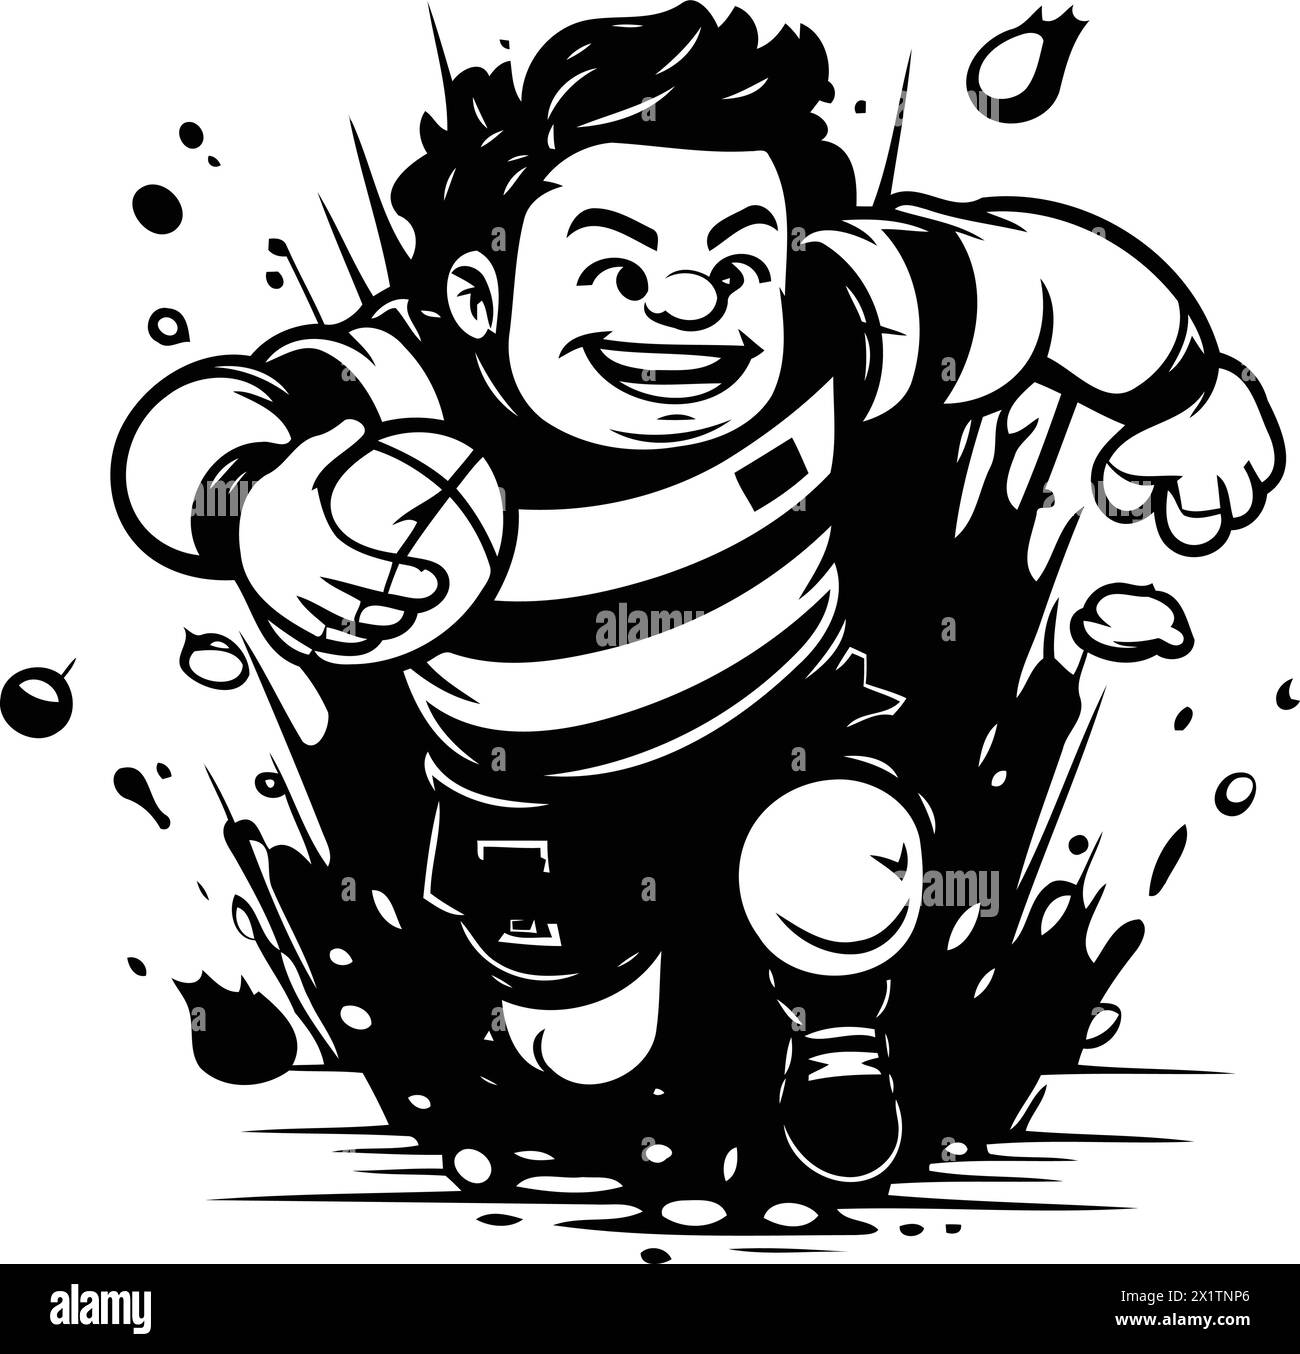 Vector illustration of a rugby player running with ball in his hand. Stock Vector